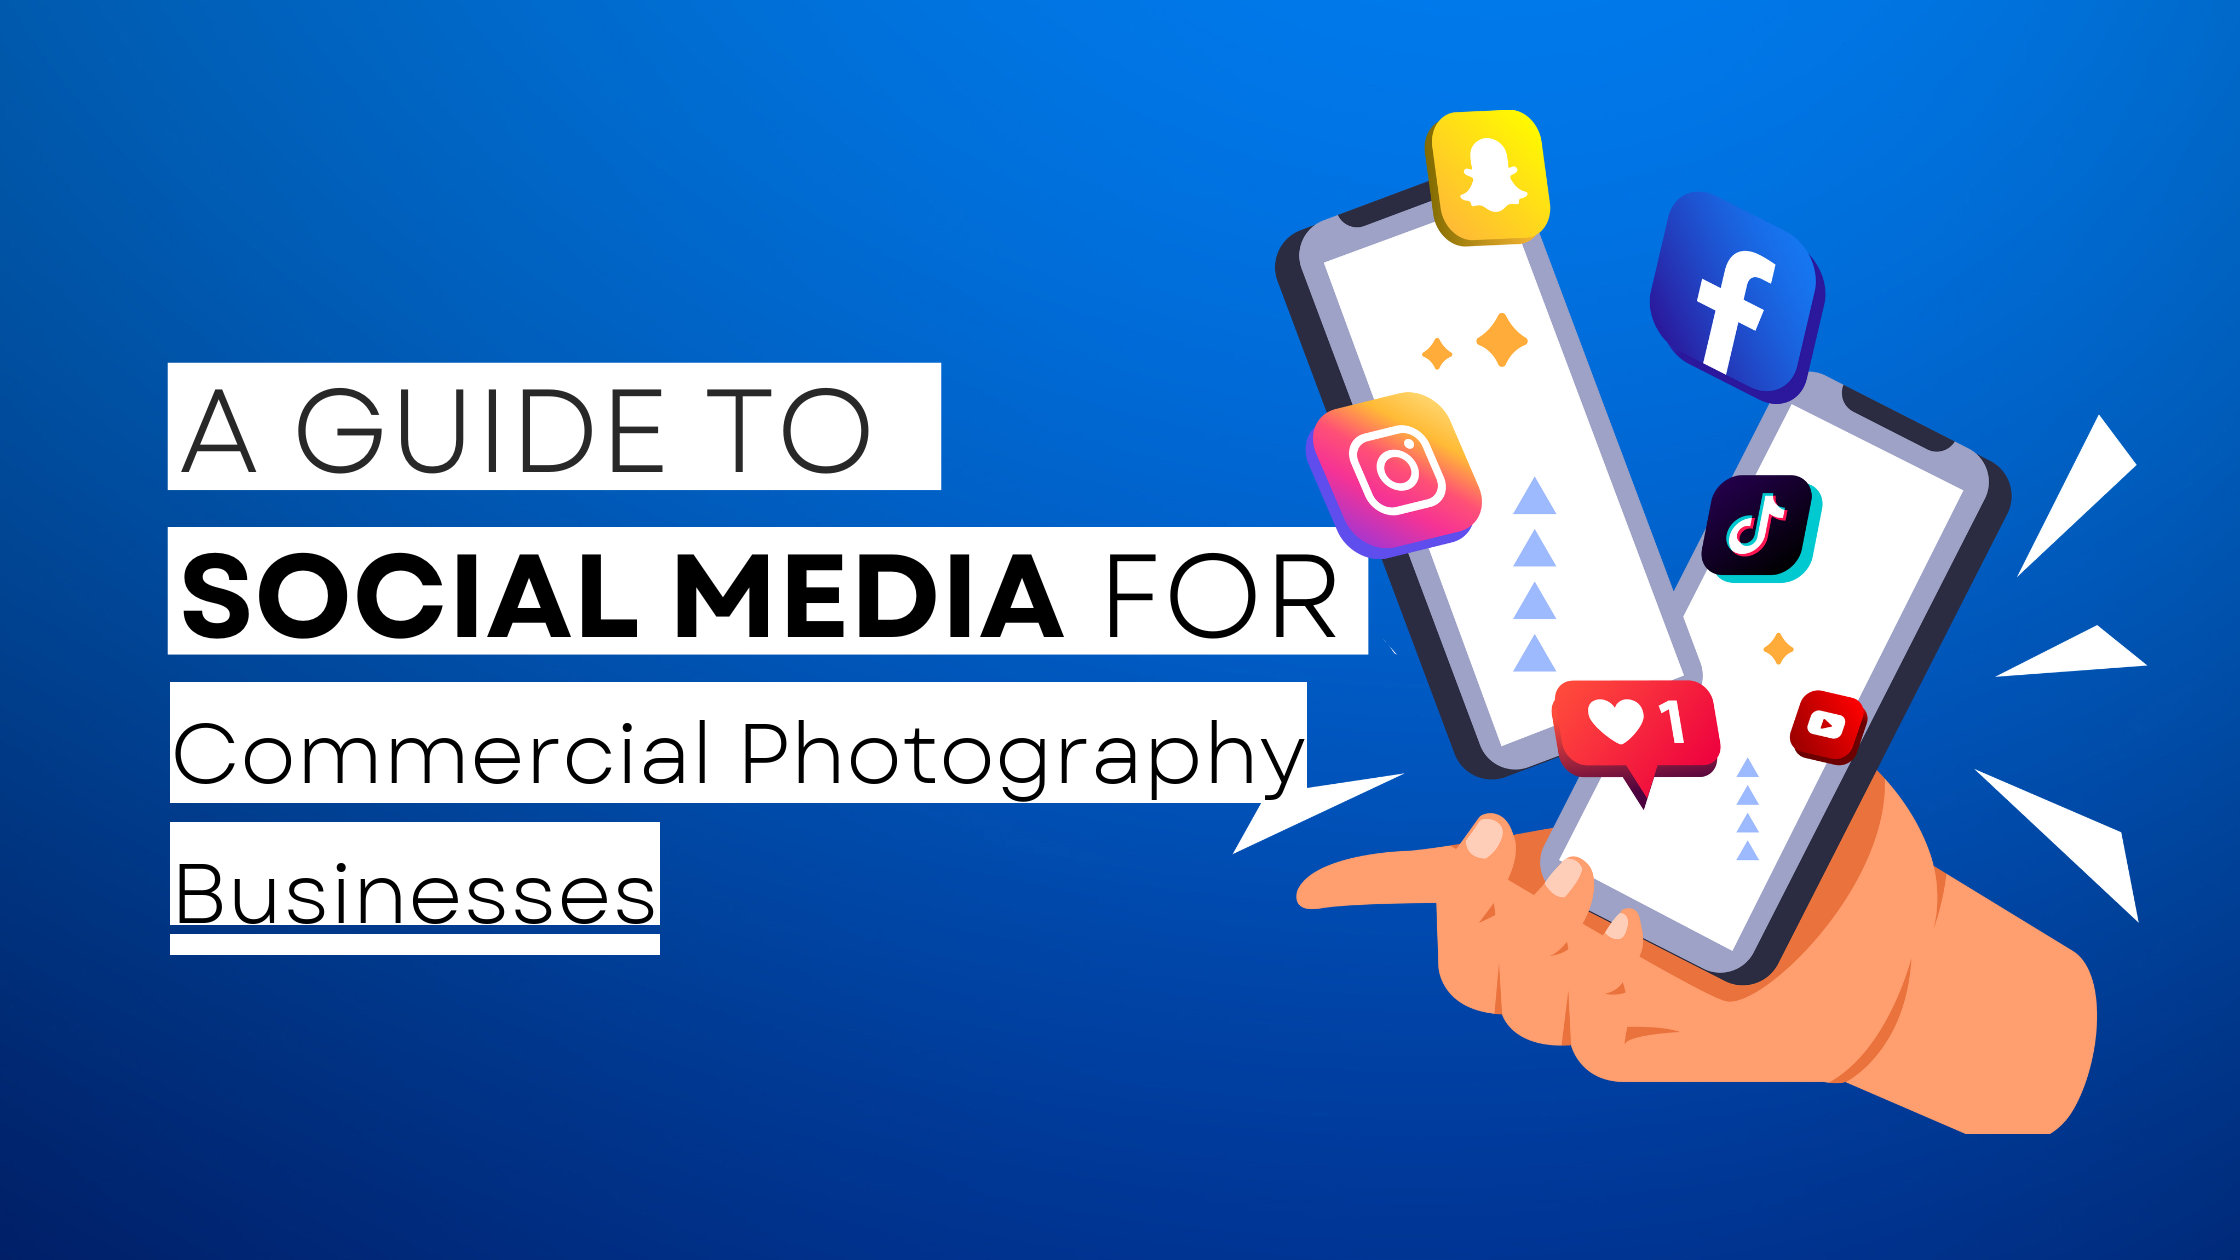 How to start Commercial Photography on social media